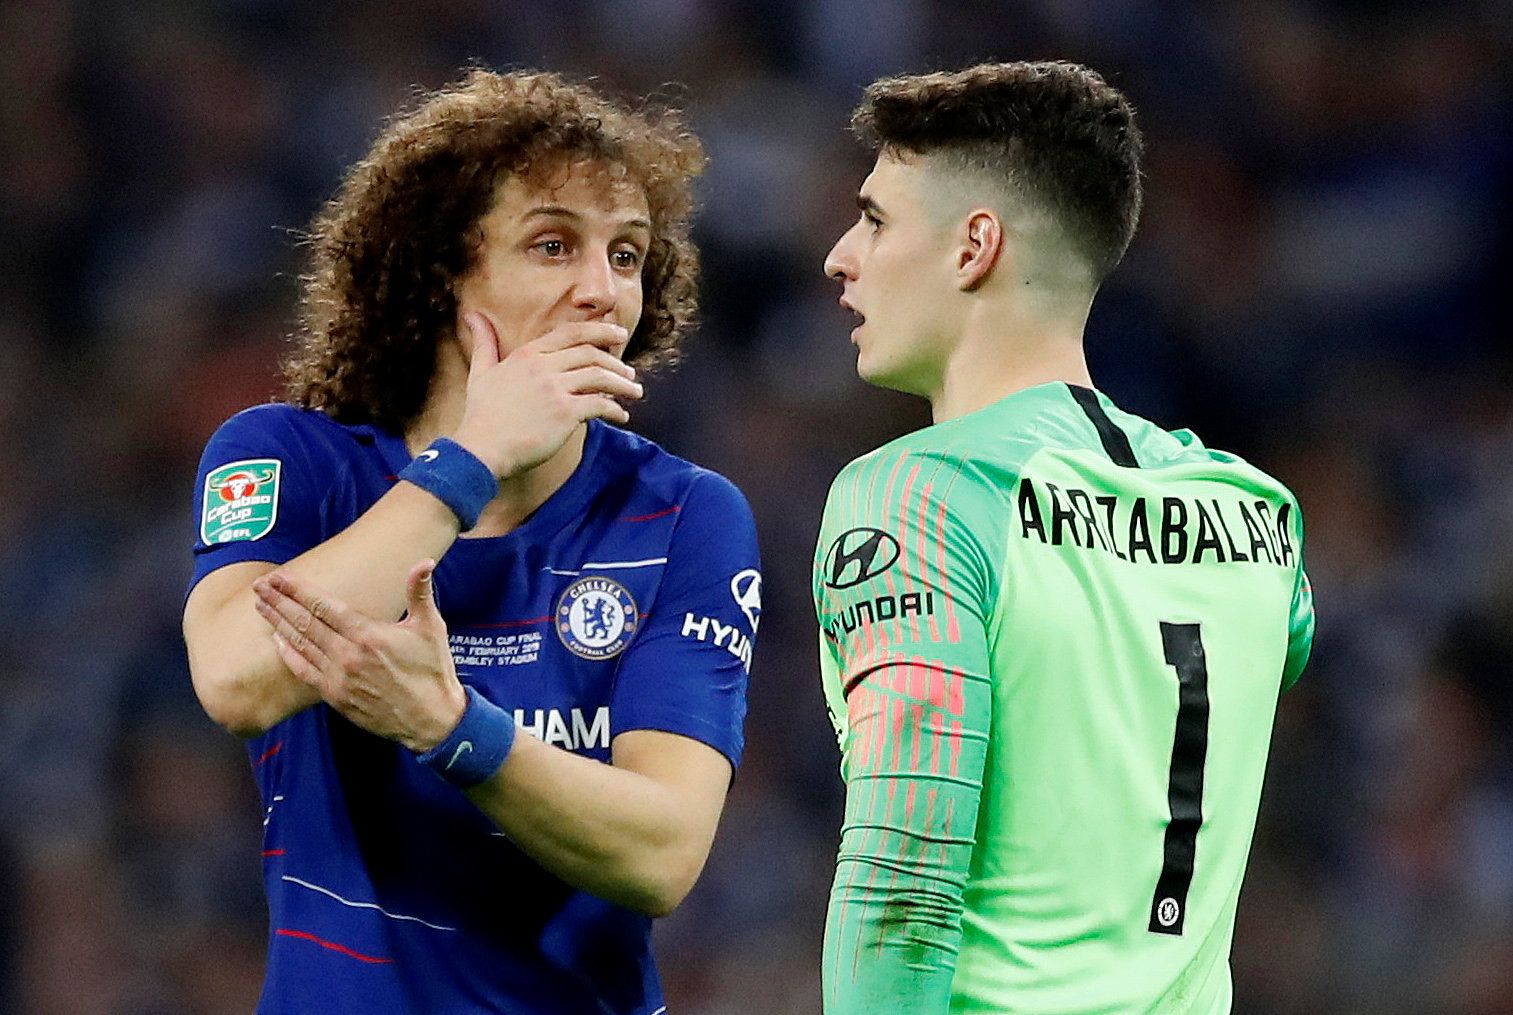 Soccer Football - Carabao Cup Final - Manchester City v Chelsea - Wembley Stadium, London, Britain - February 24, 2019  Chelsea's Kepa Arrizabalaga speaks with David Luiz after he is called to be substituted     Action Images via Reuters/Carl Recine  EDITORIAL USE ONLY. No use with unauthorized audio, video, data, fixture lists, club/league logos or 